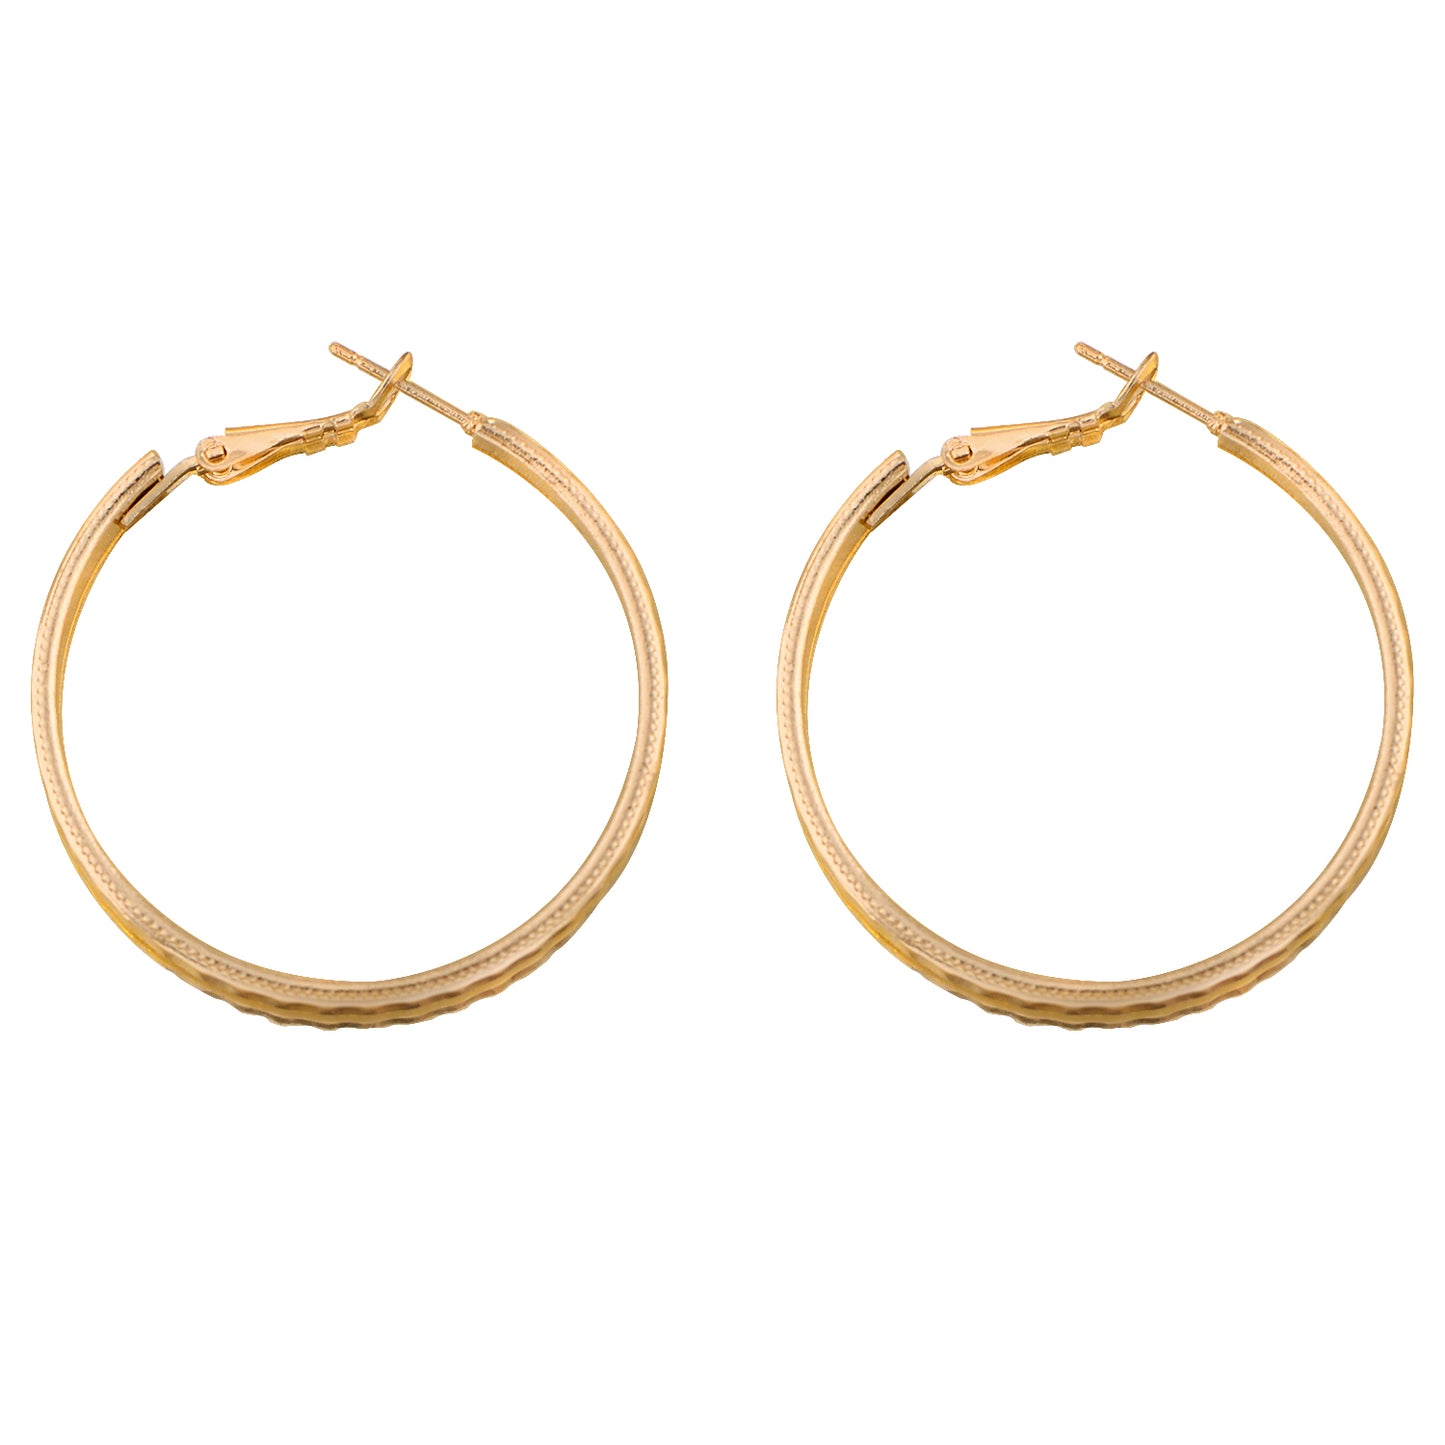 Alilang 14K Gold Plated Round Clip-top Hoop Earrings with 925 Sterling Silver Post for Women Girls